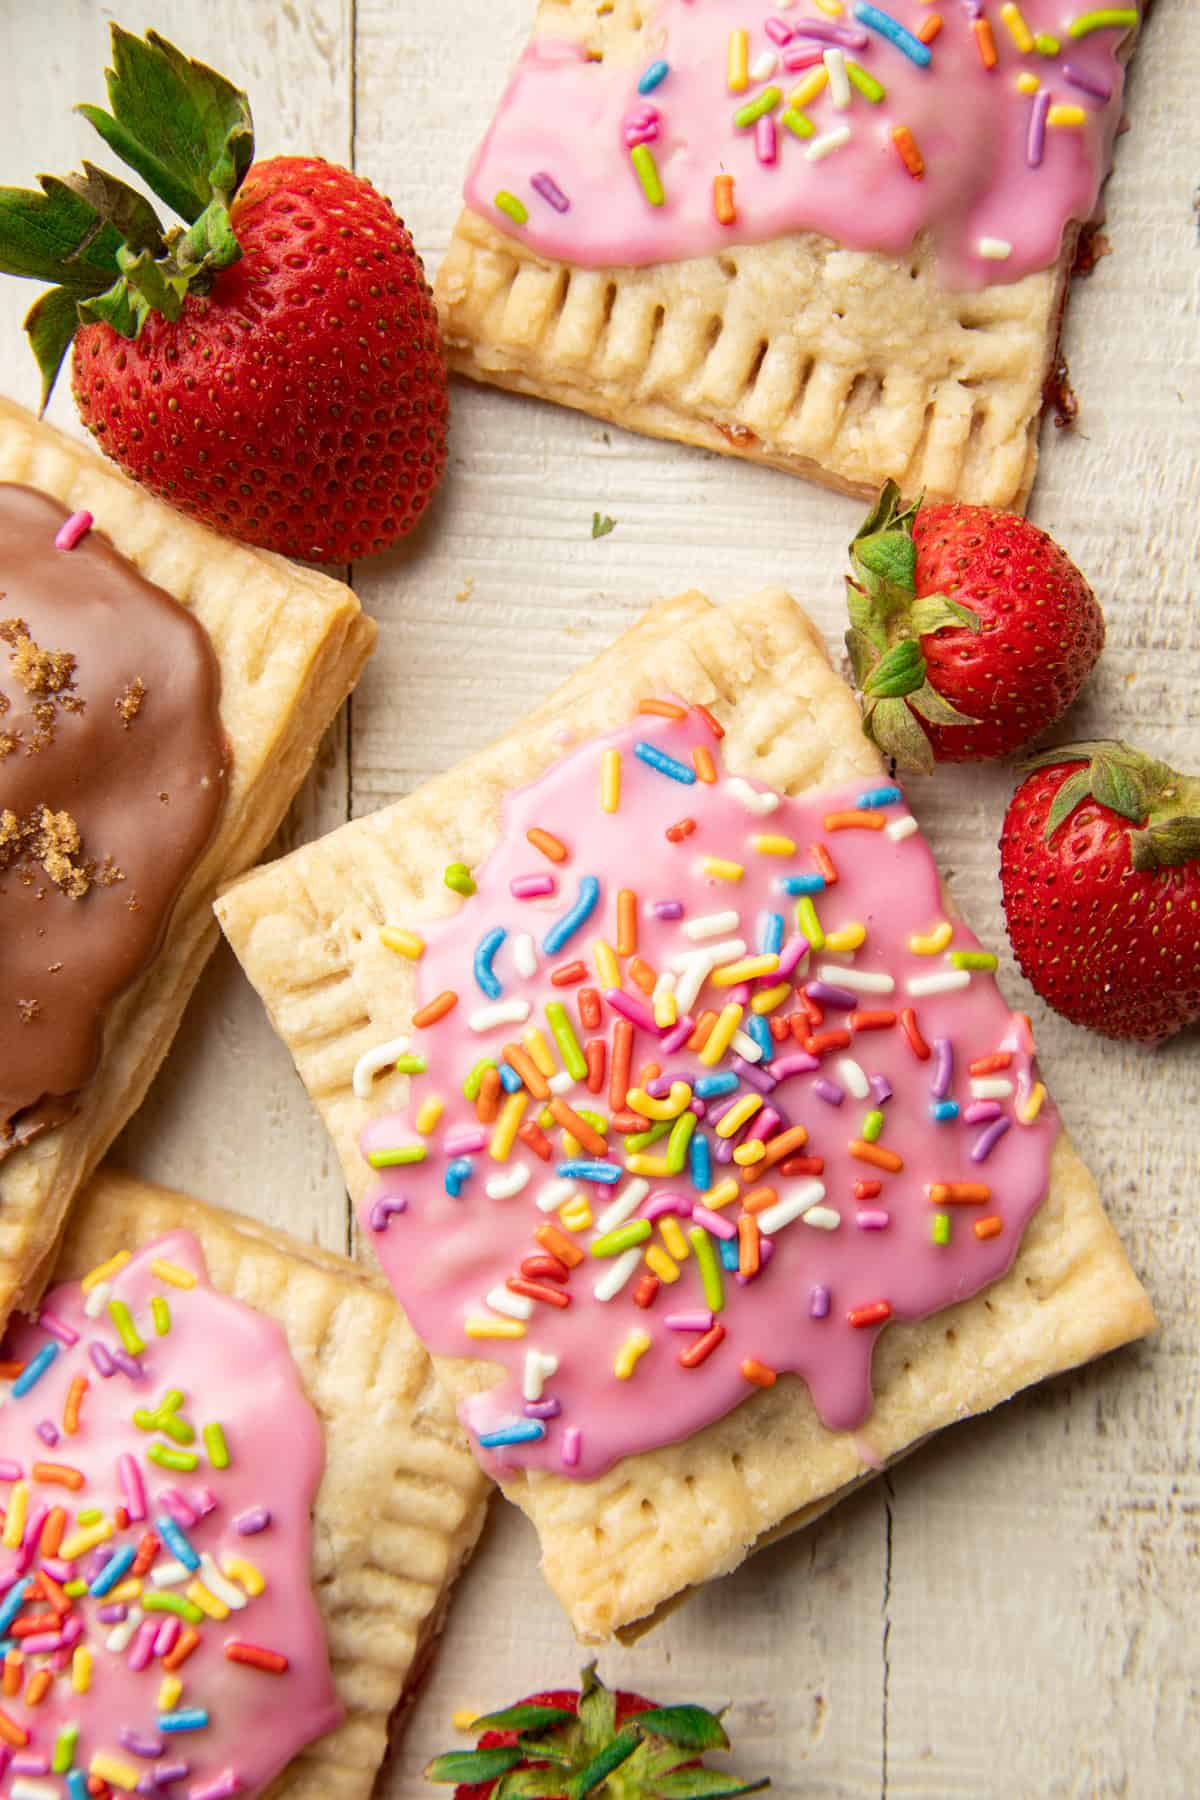 Wooden surface set with Vegan Pop Tarts and strawberries.